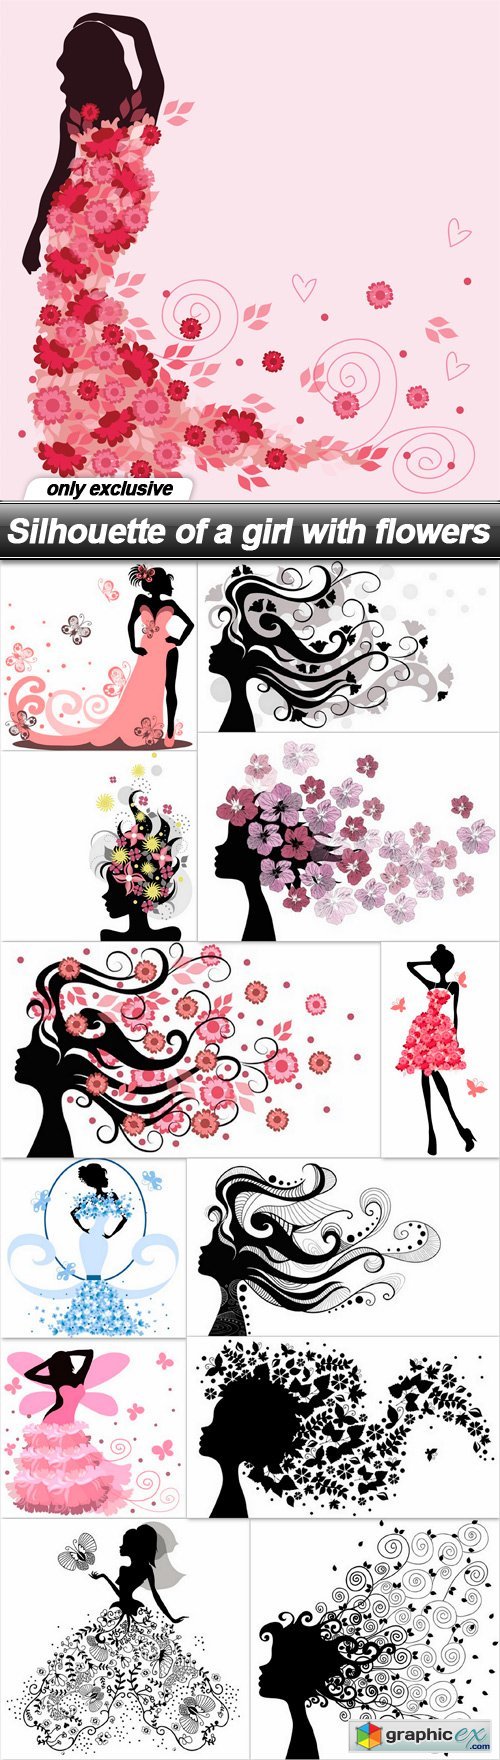 Silhouette of a girl with flowers - 13 UHQ JPEG